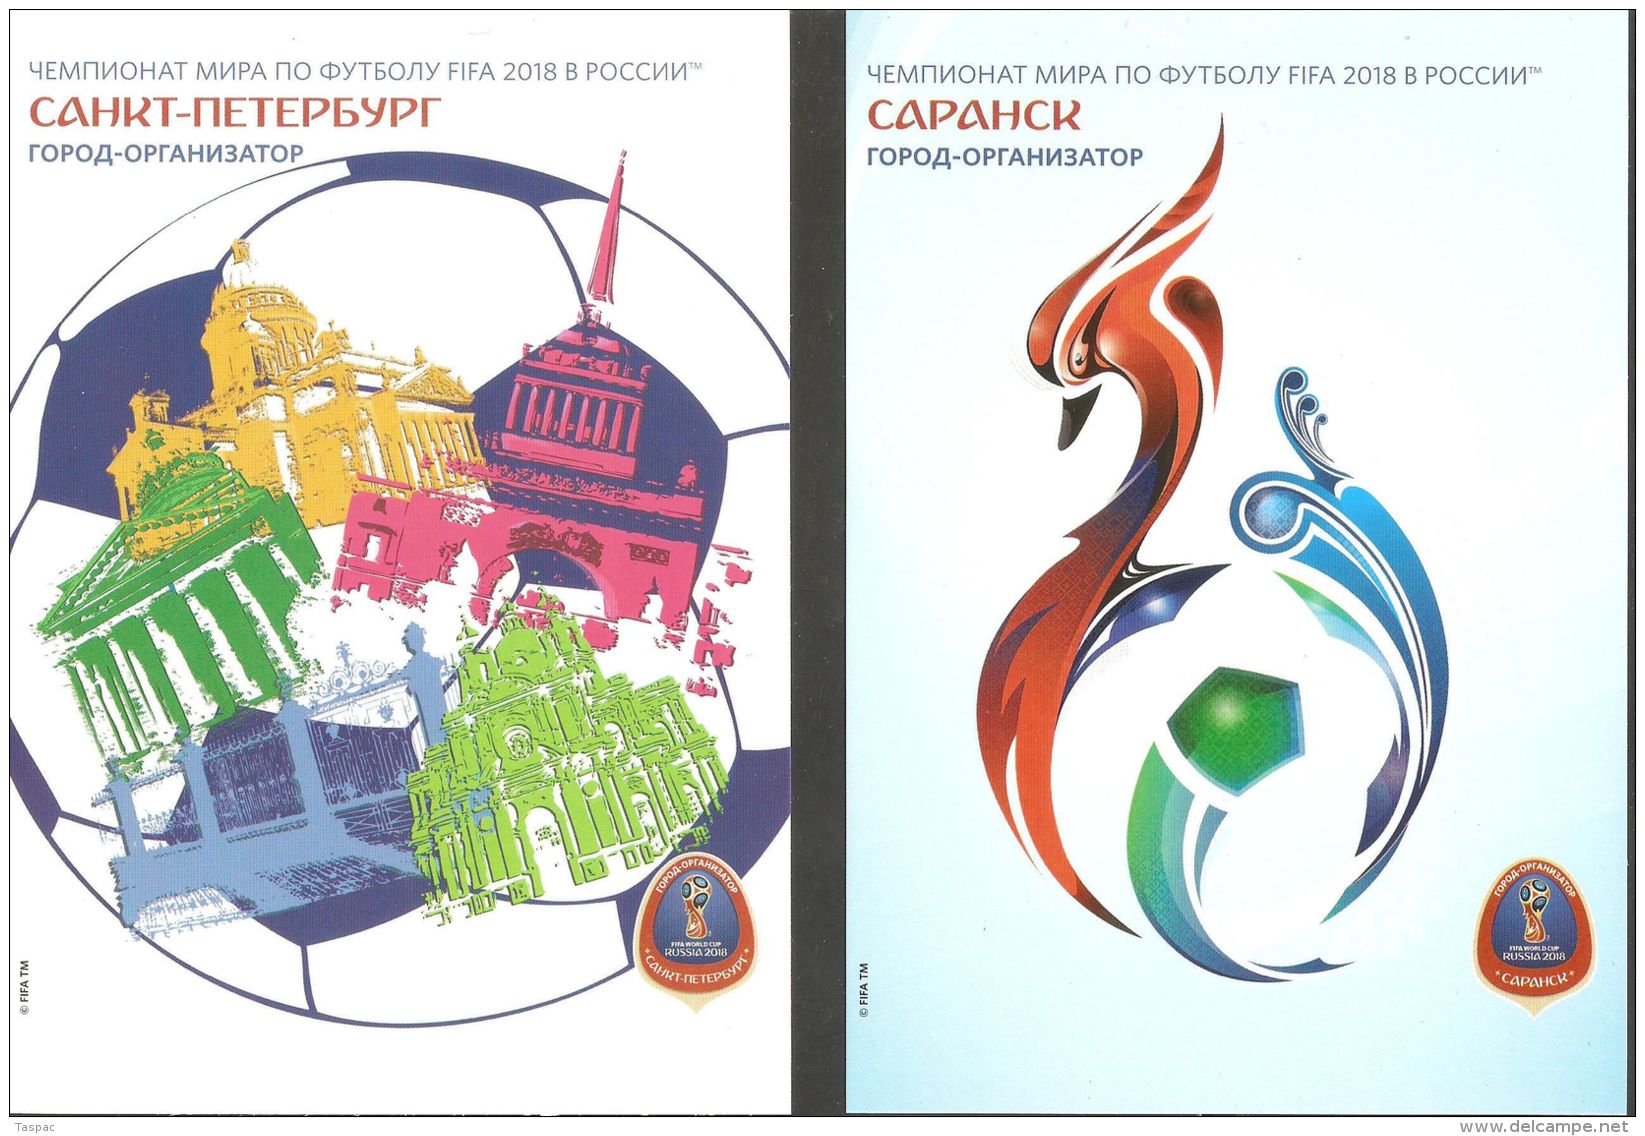 Russia 2015 # 332-342 Postal Stationery Postcards Unused - Set of 11 - World Cup Soccer Championship 2018 / Host Cities